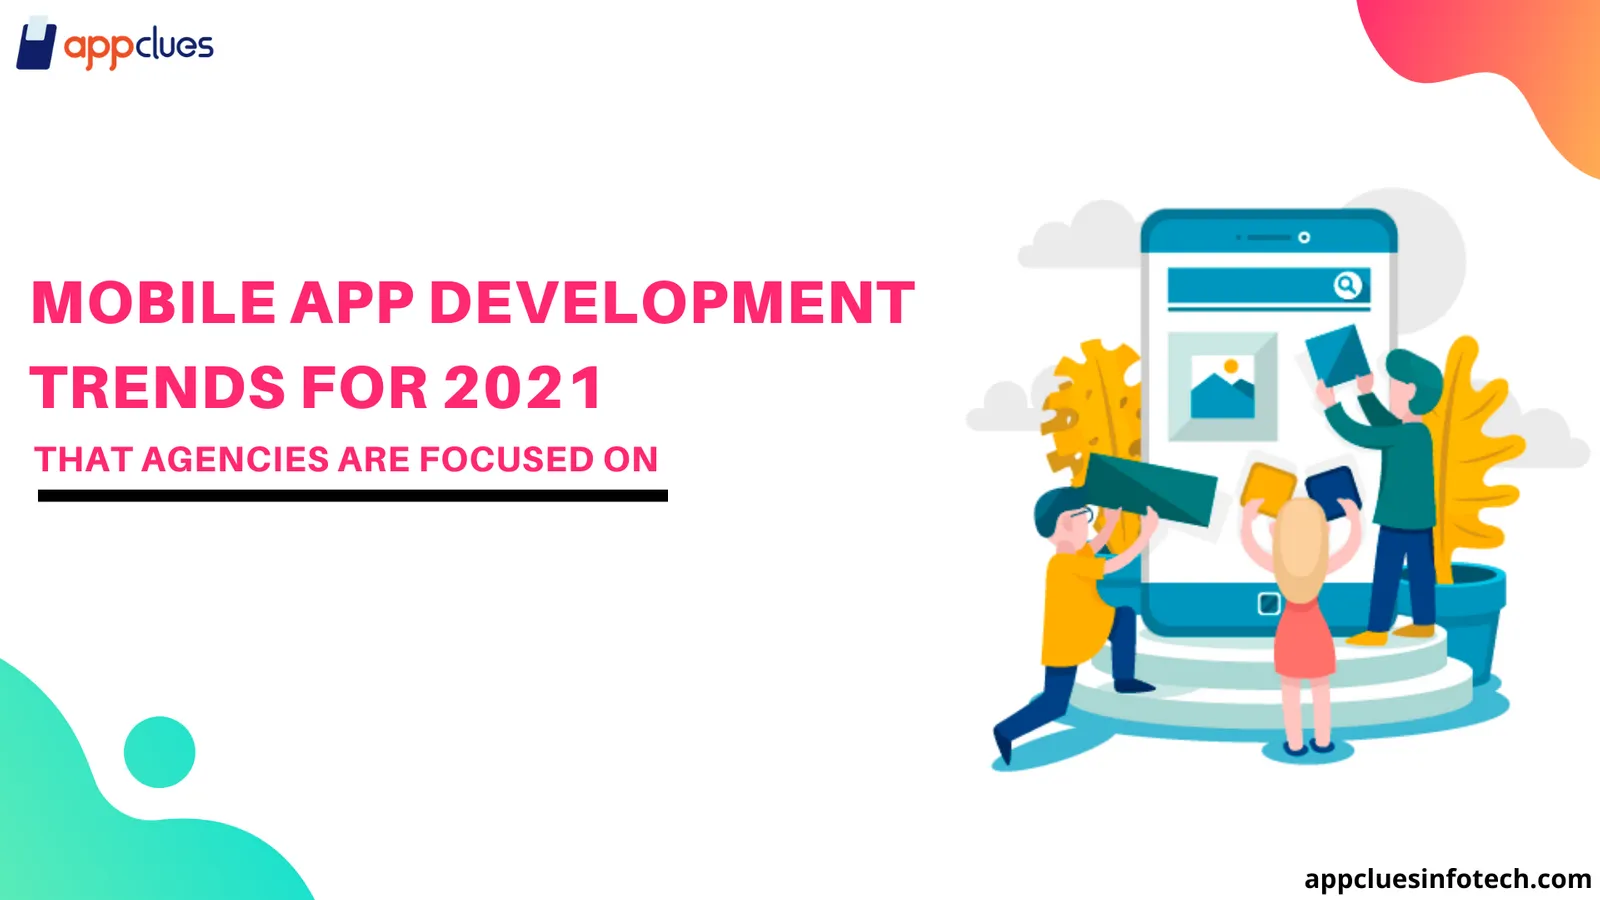 Mobile App Development Trends to Watch Out For in 2021